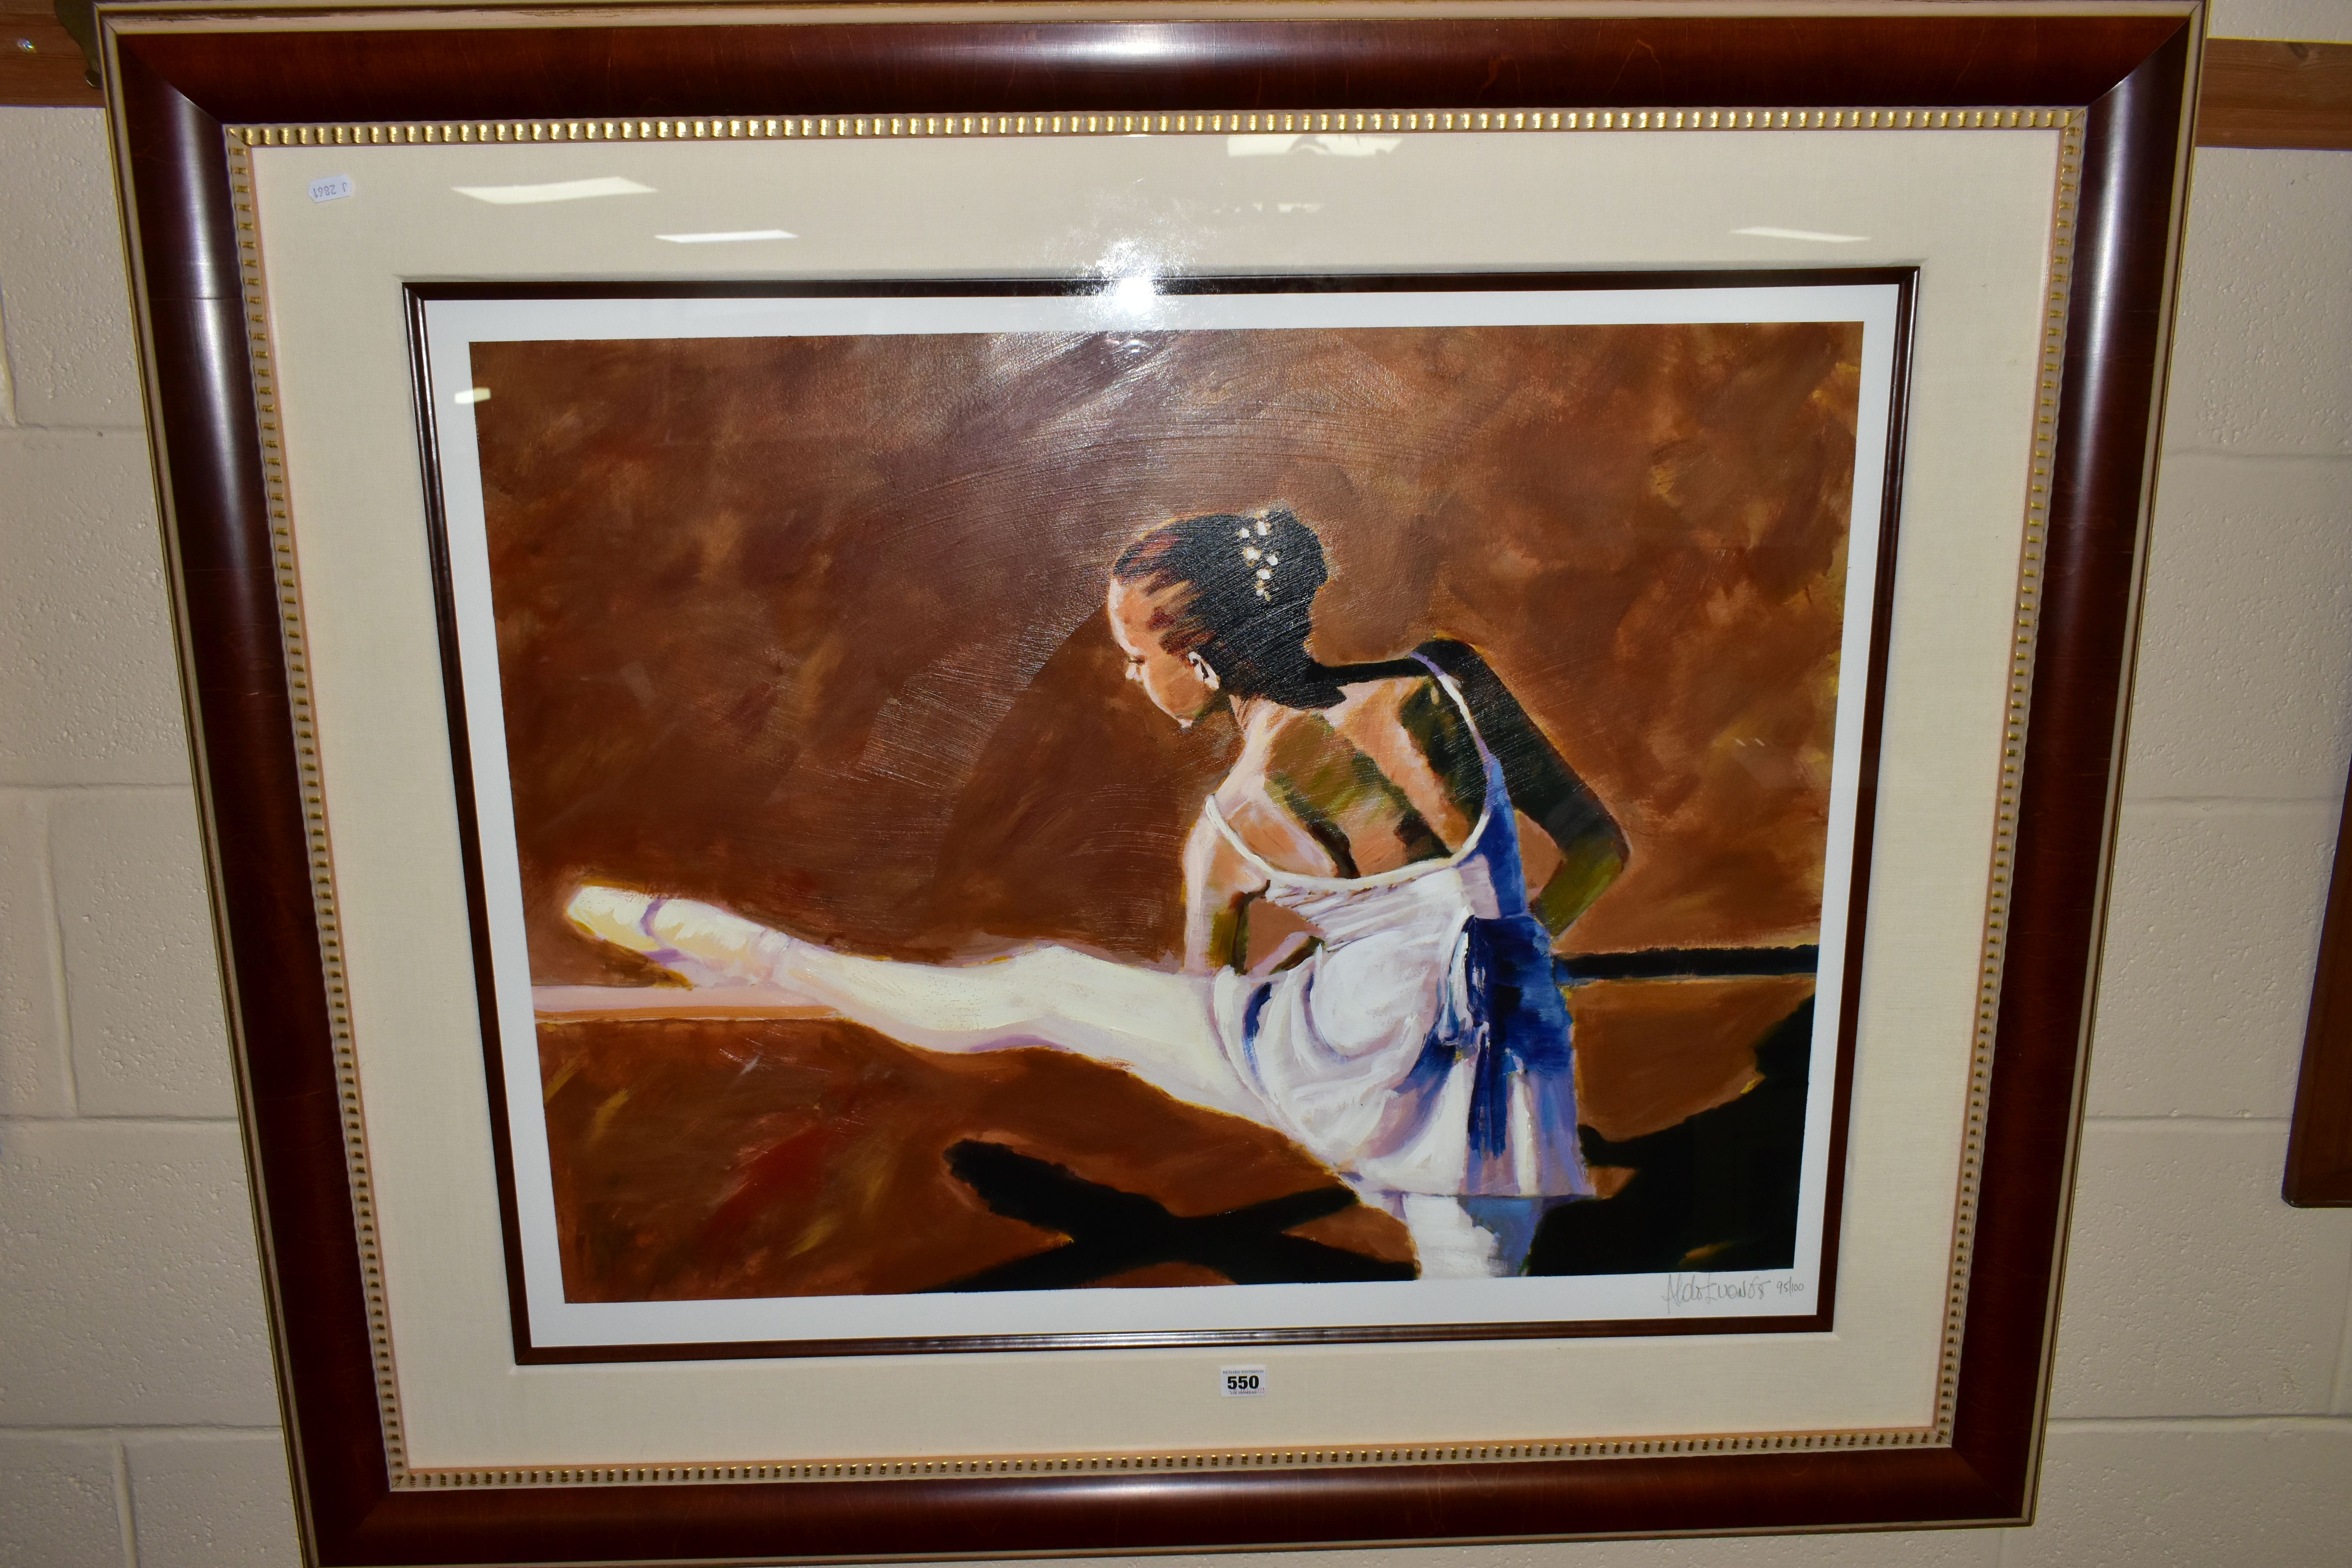 ALDO LUONGO (ARGENTINA 1940) 'AT THE BARRE', a signed limited edition print depicting a ballerina